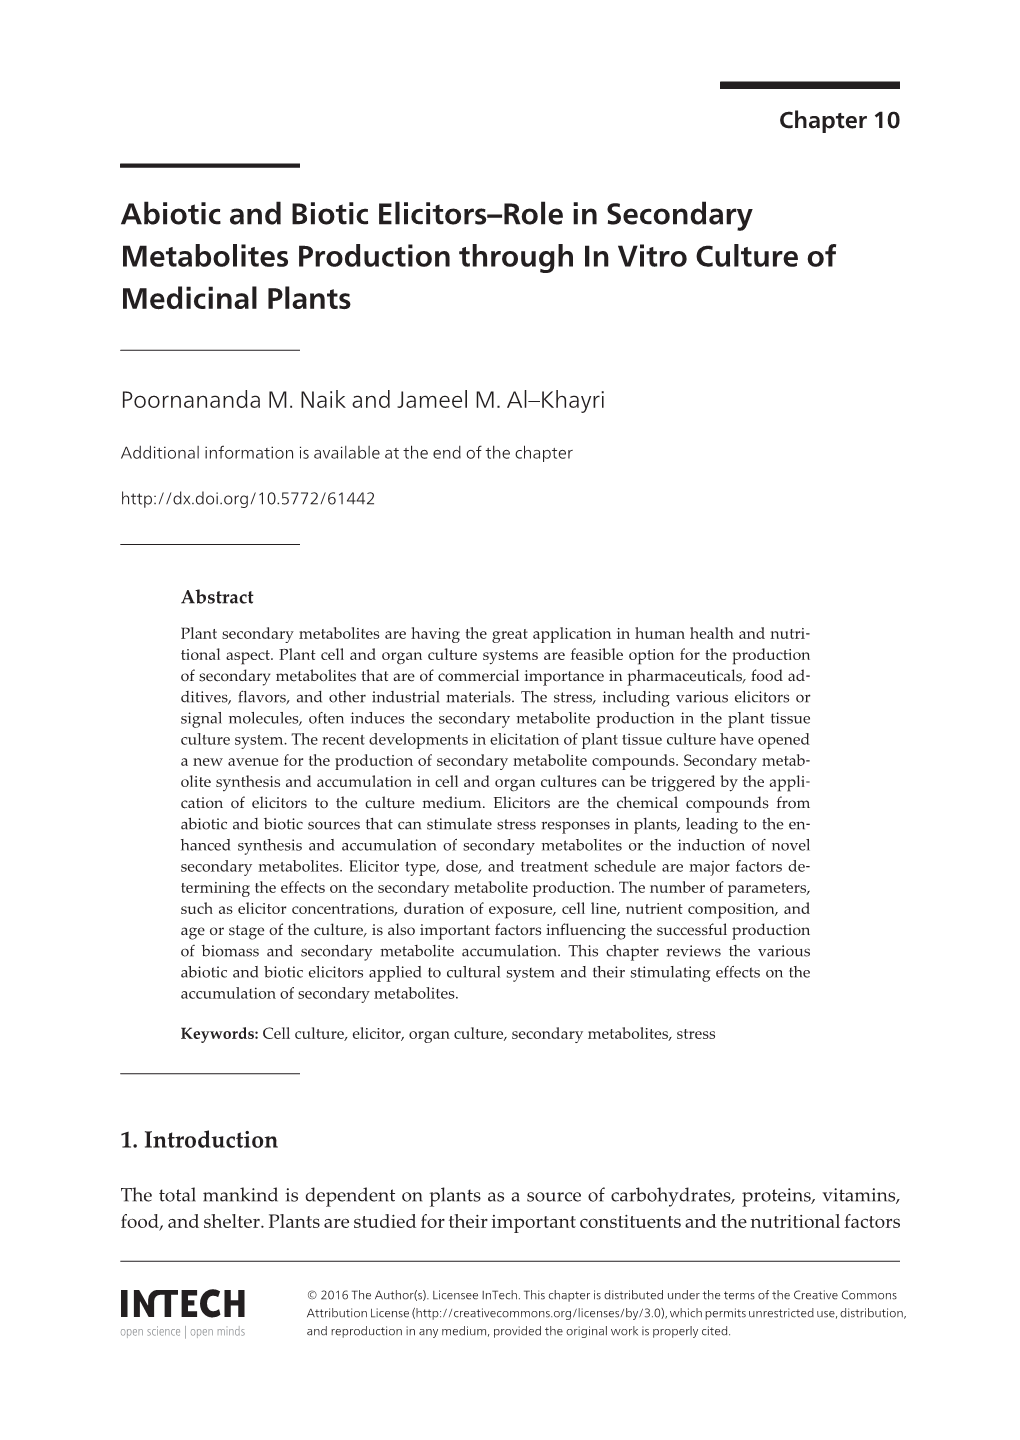 Abiotic and Biotic Elicitors–Role in Secondary Metabolites Production Through in Vitro Culture of Medicinal Plants